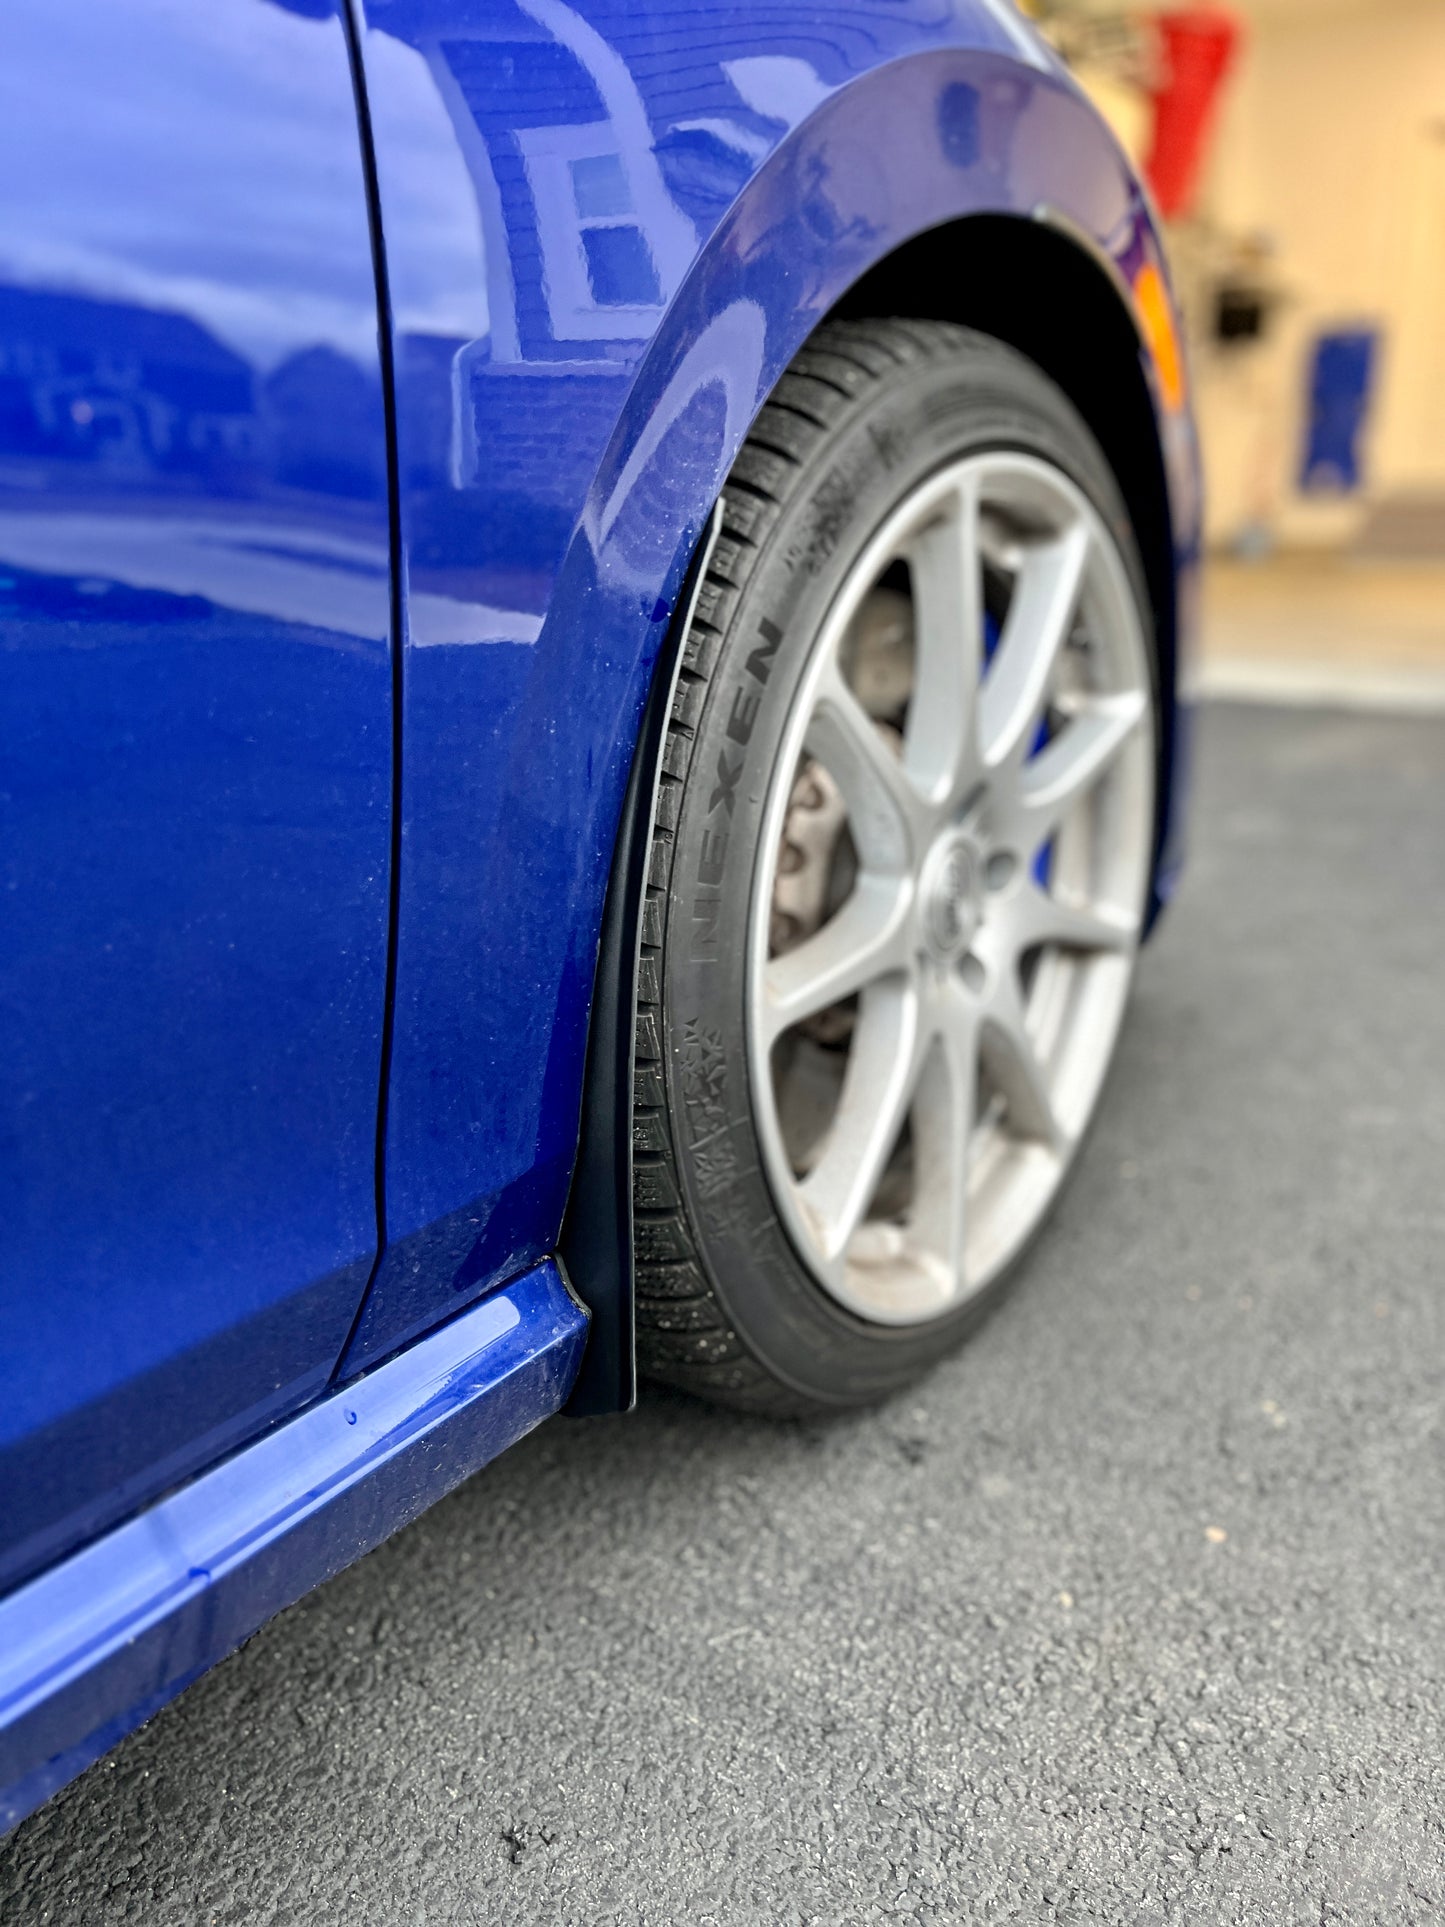 Golf R front guard